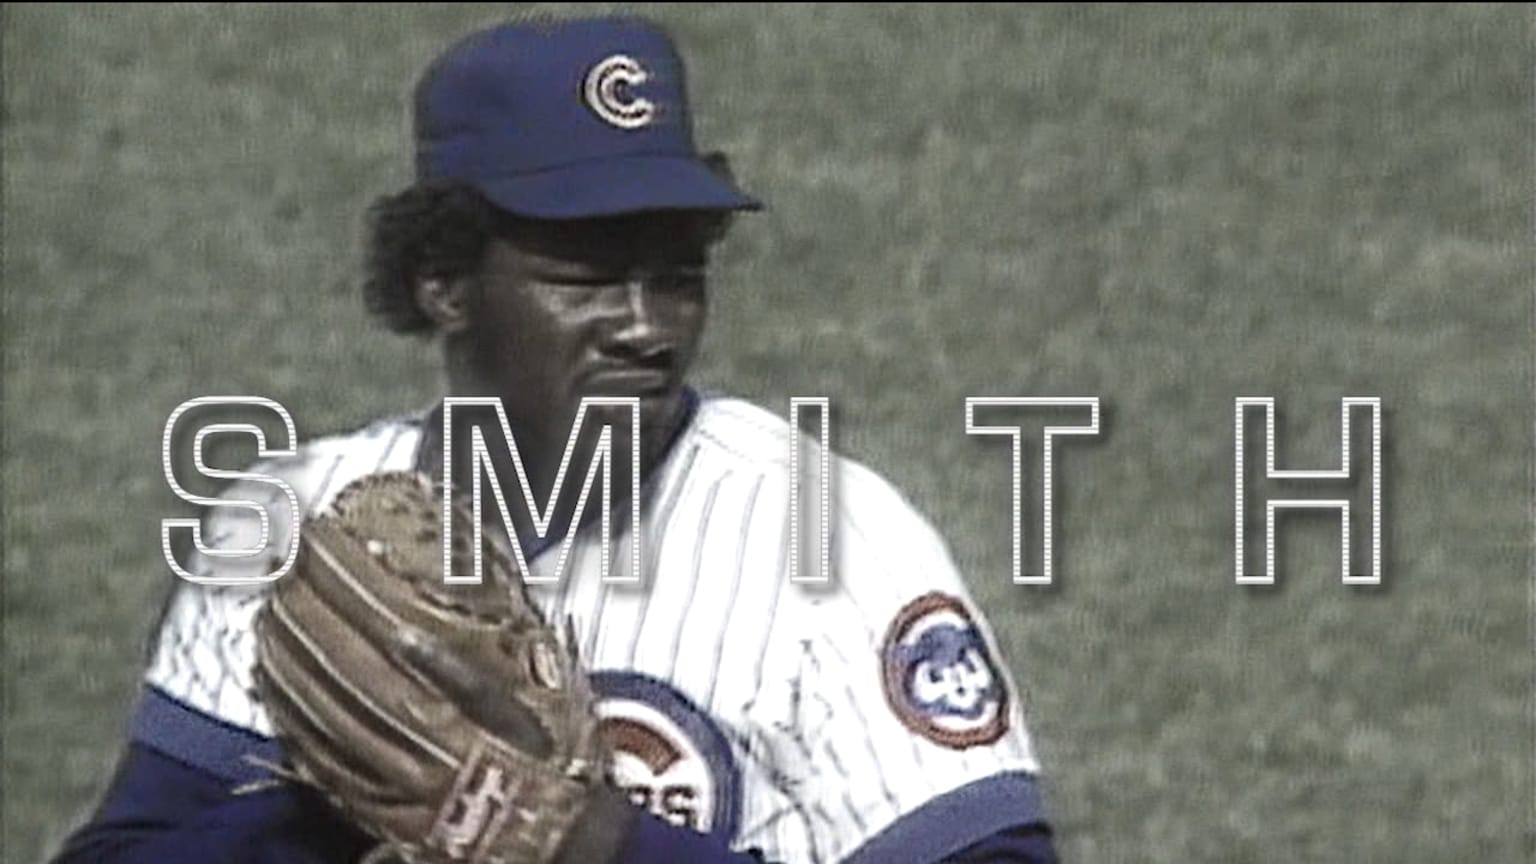 Lee Smith's top career moments